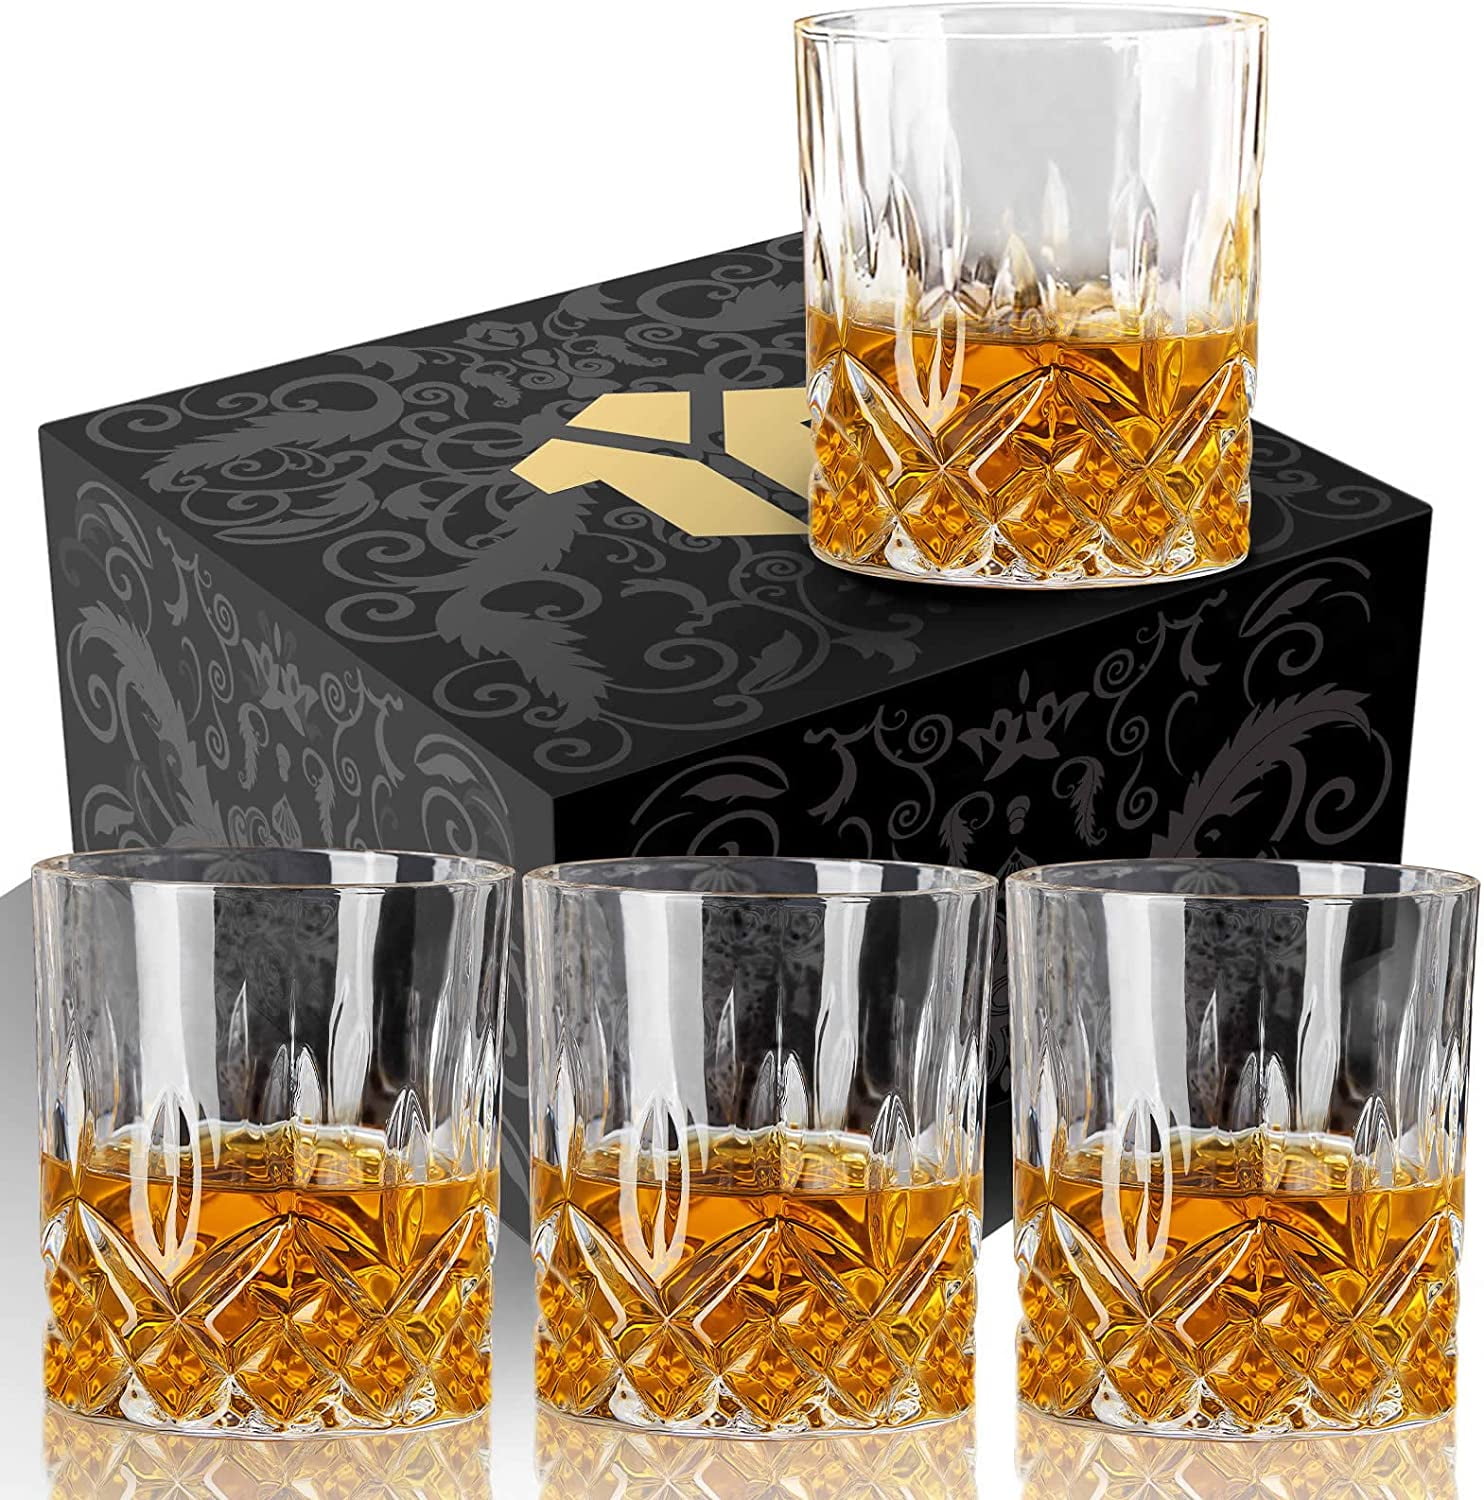 N/C JINZHI Old fashioned Drinking Glass 8 OZ Color Crystal Glass Cup Amber  Cobalt Blue Whiskey Glasses With Gift Box